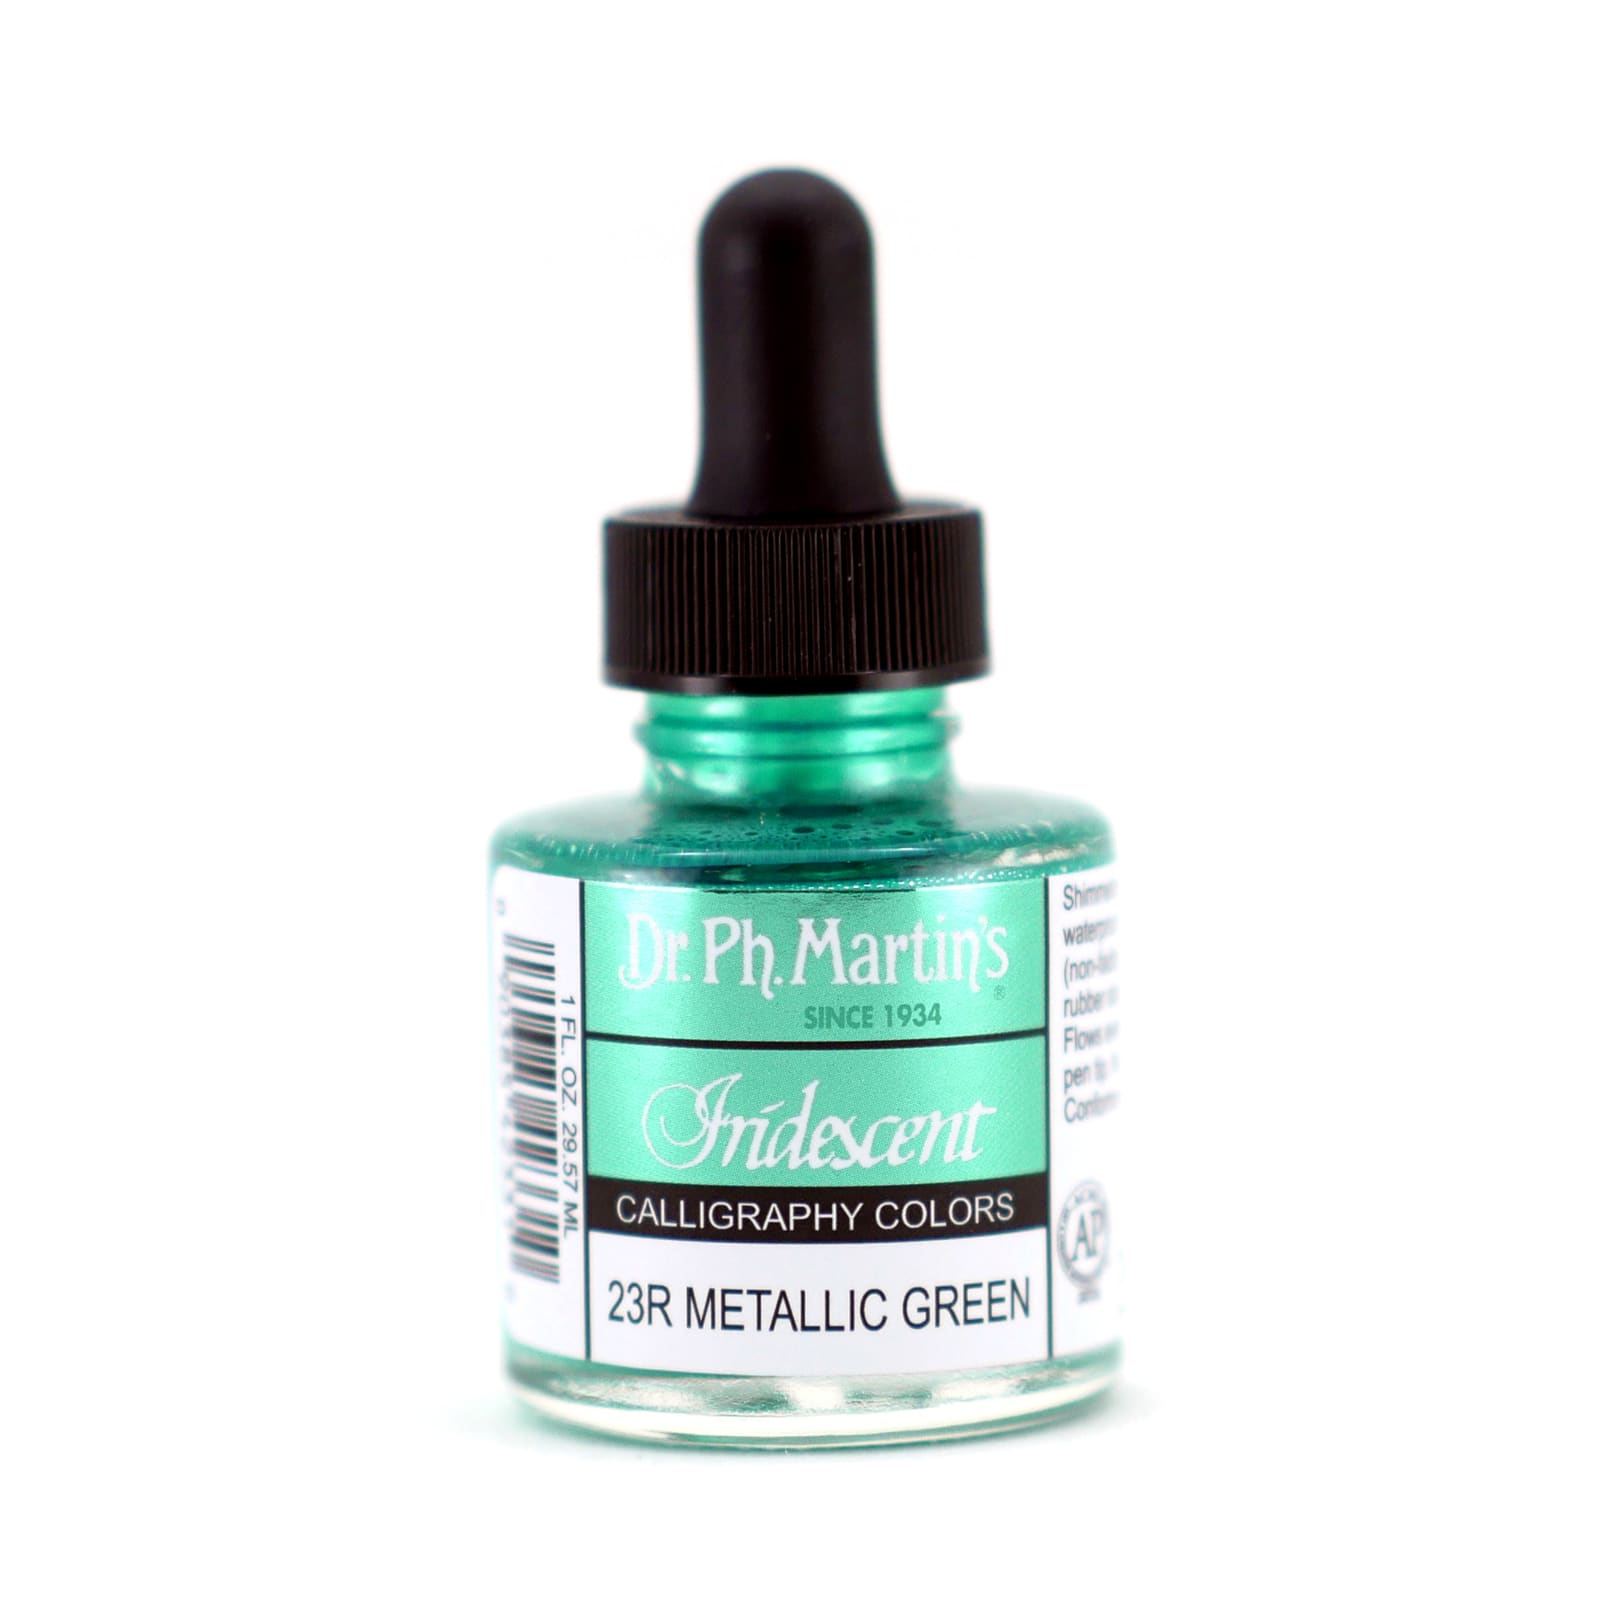 Dr. Ph. Martin's® Iridescent Calligraphy Color Ink | Michaels